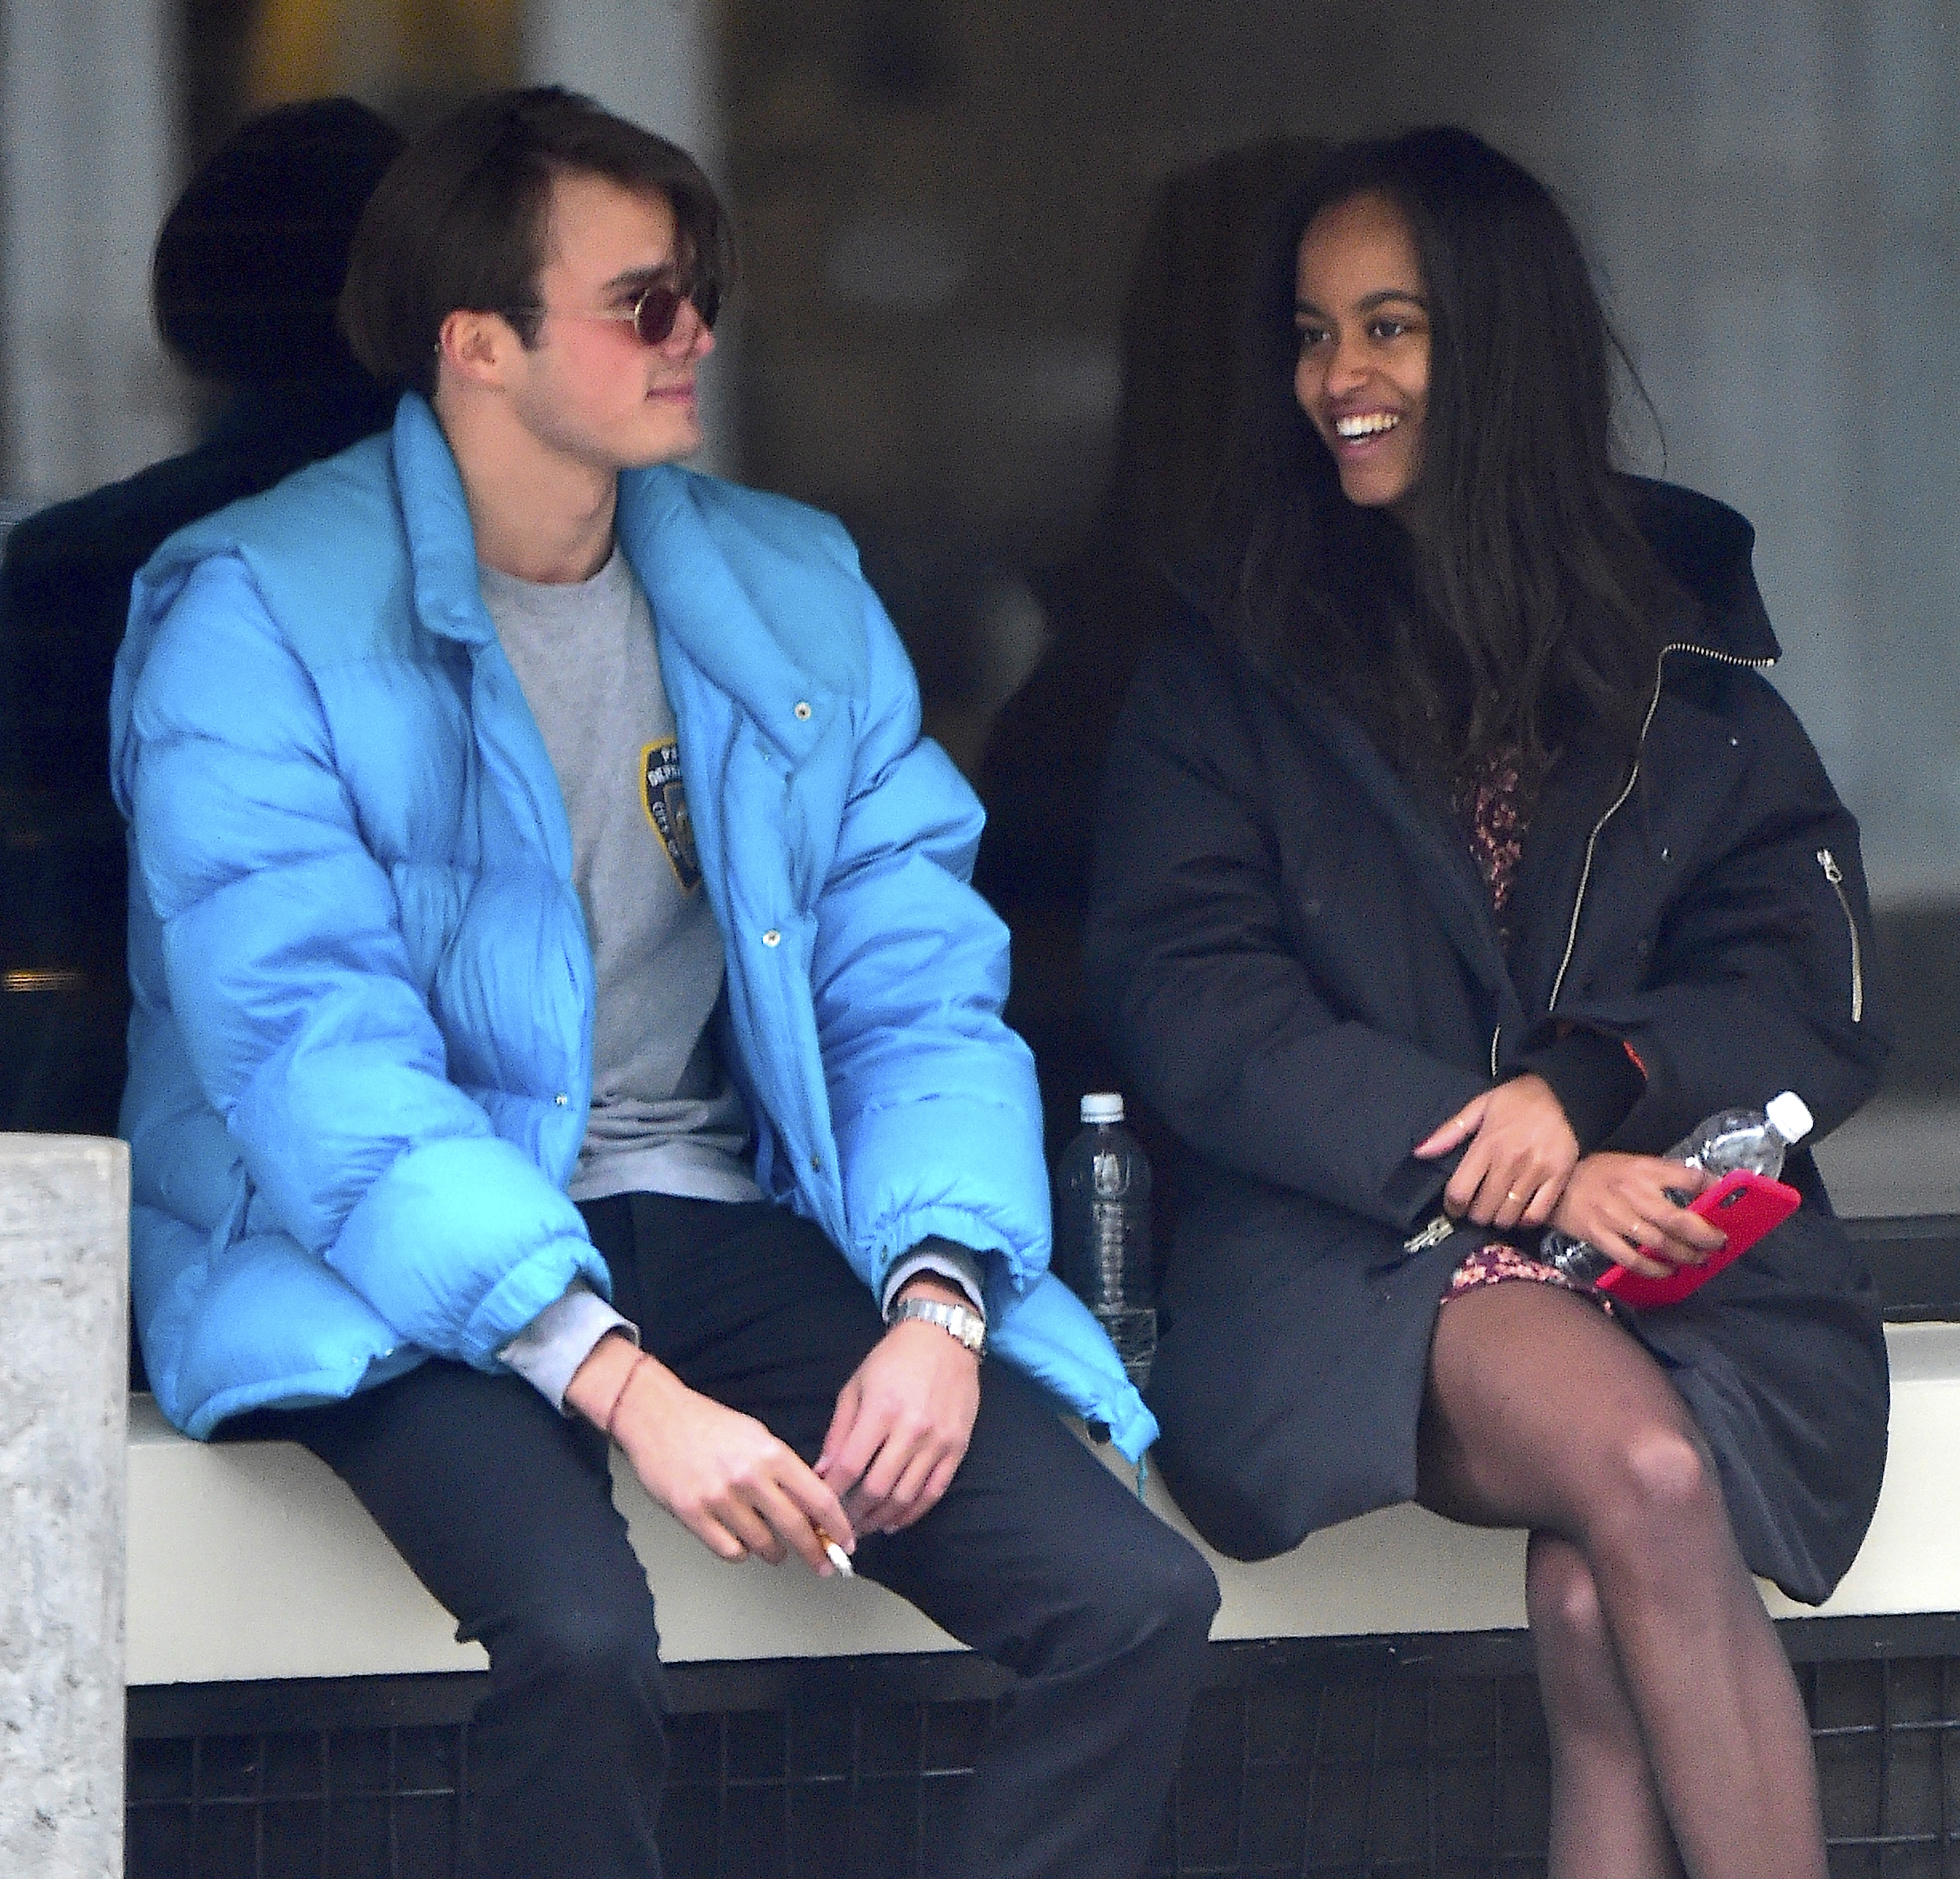 Rory Farquharson and Malia Obama are seen in New York City on January 20, 2018 | Source: Getty Images